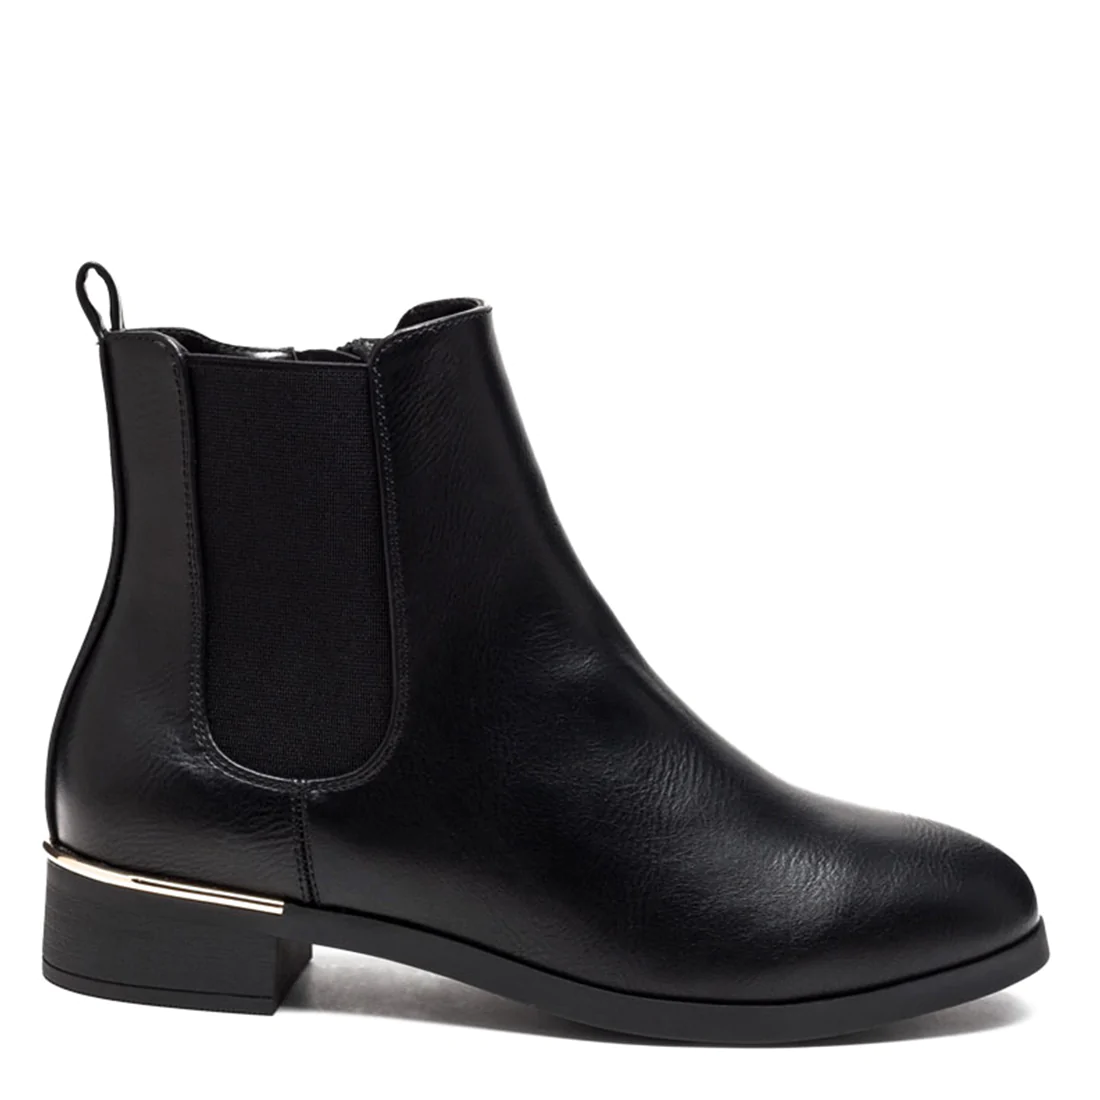 WINTER BASIC ANKLE BOOTS IN BLACK